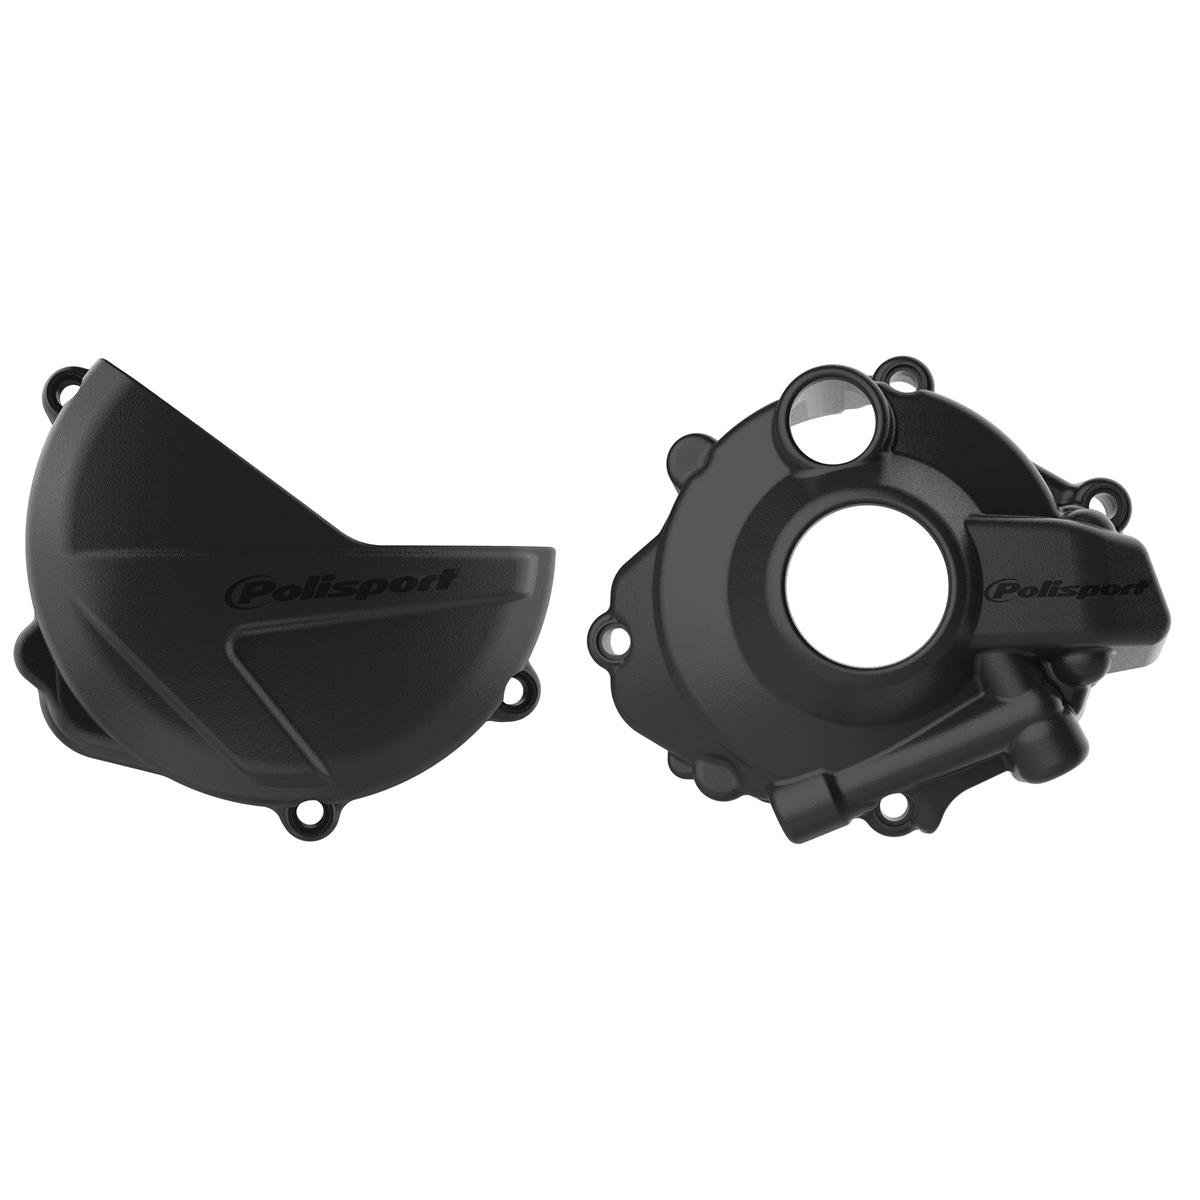 Polisport Clutch/Ignition Cover Protection  Honda CRF 250 18-20, Black